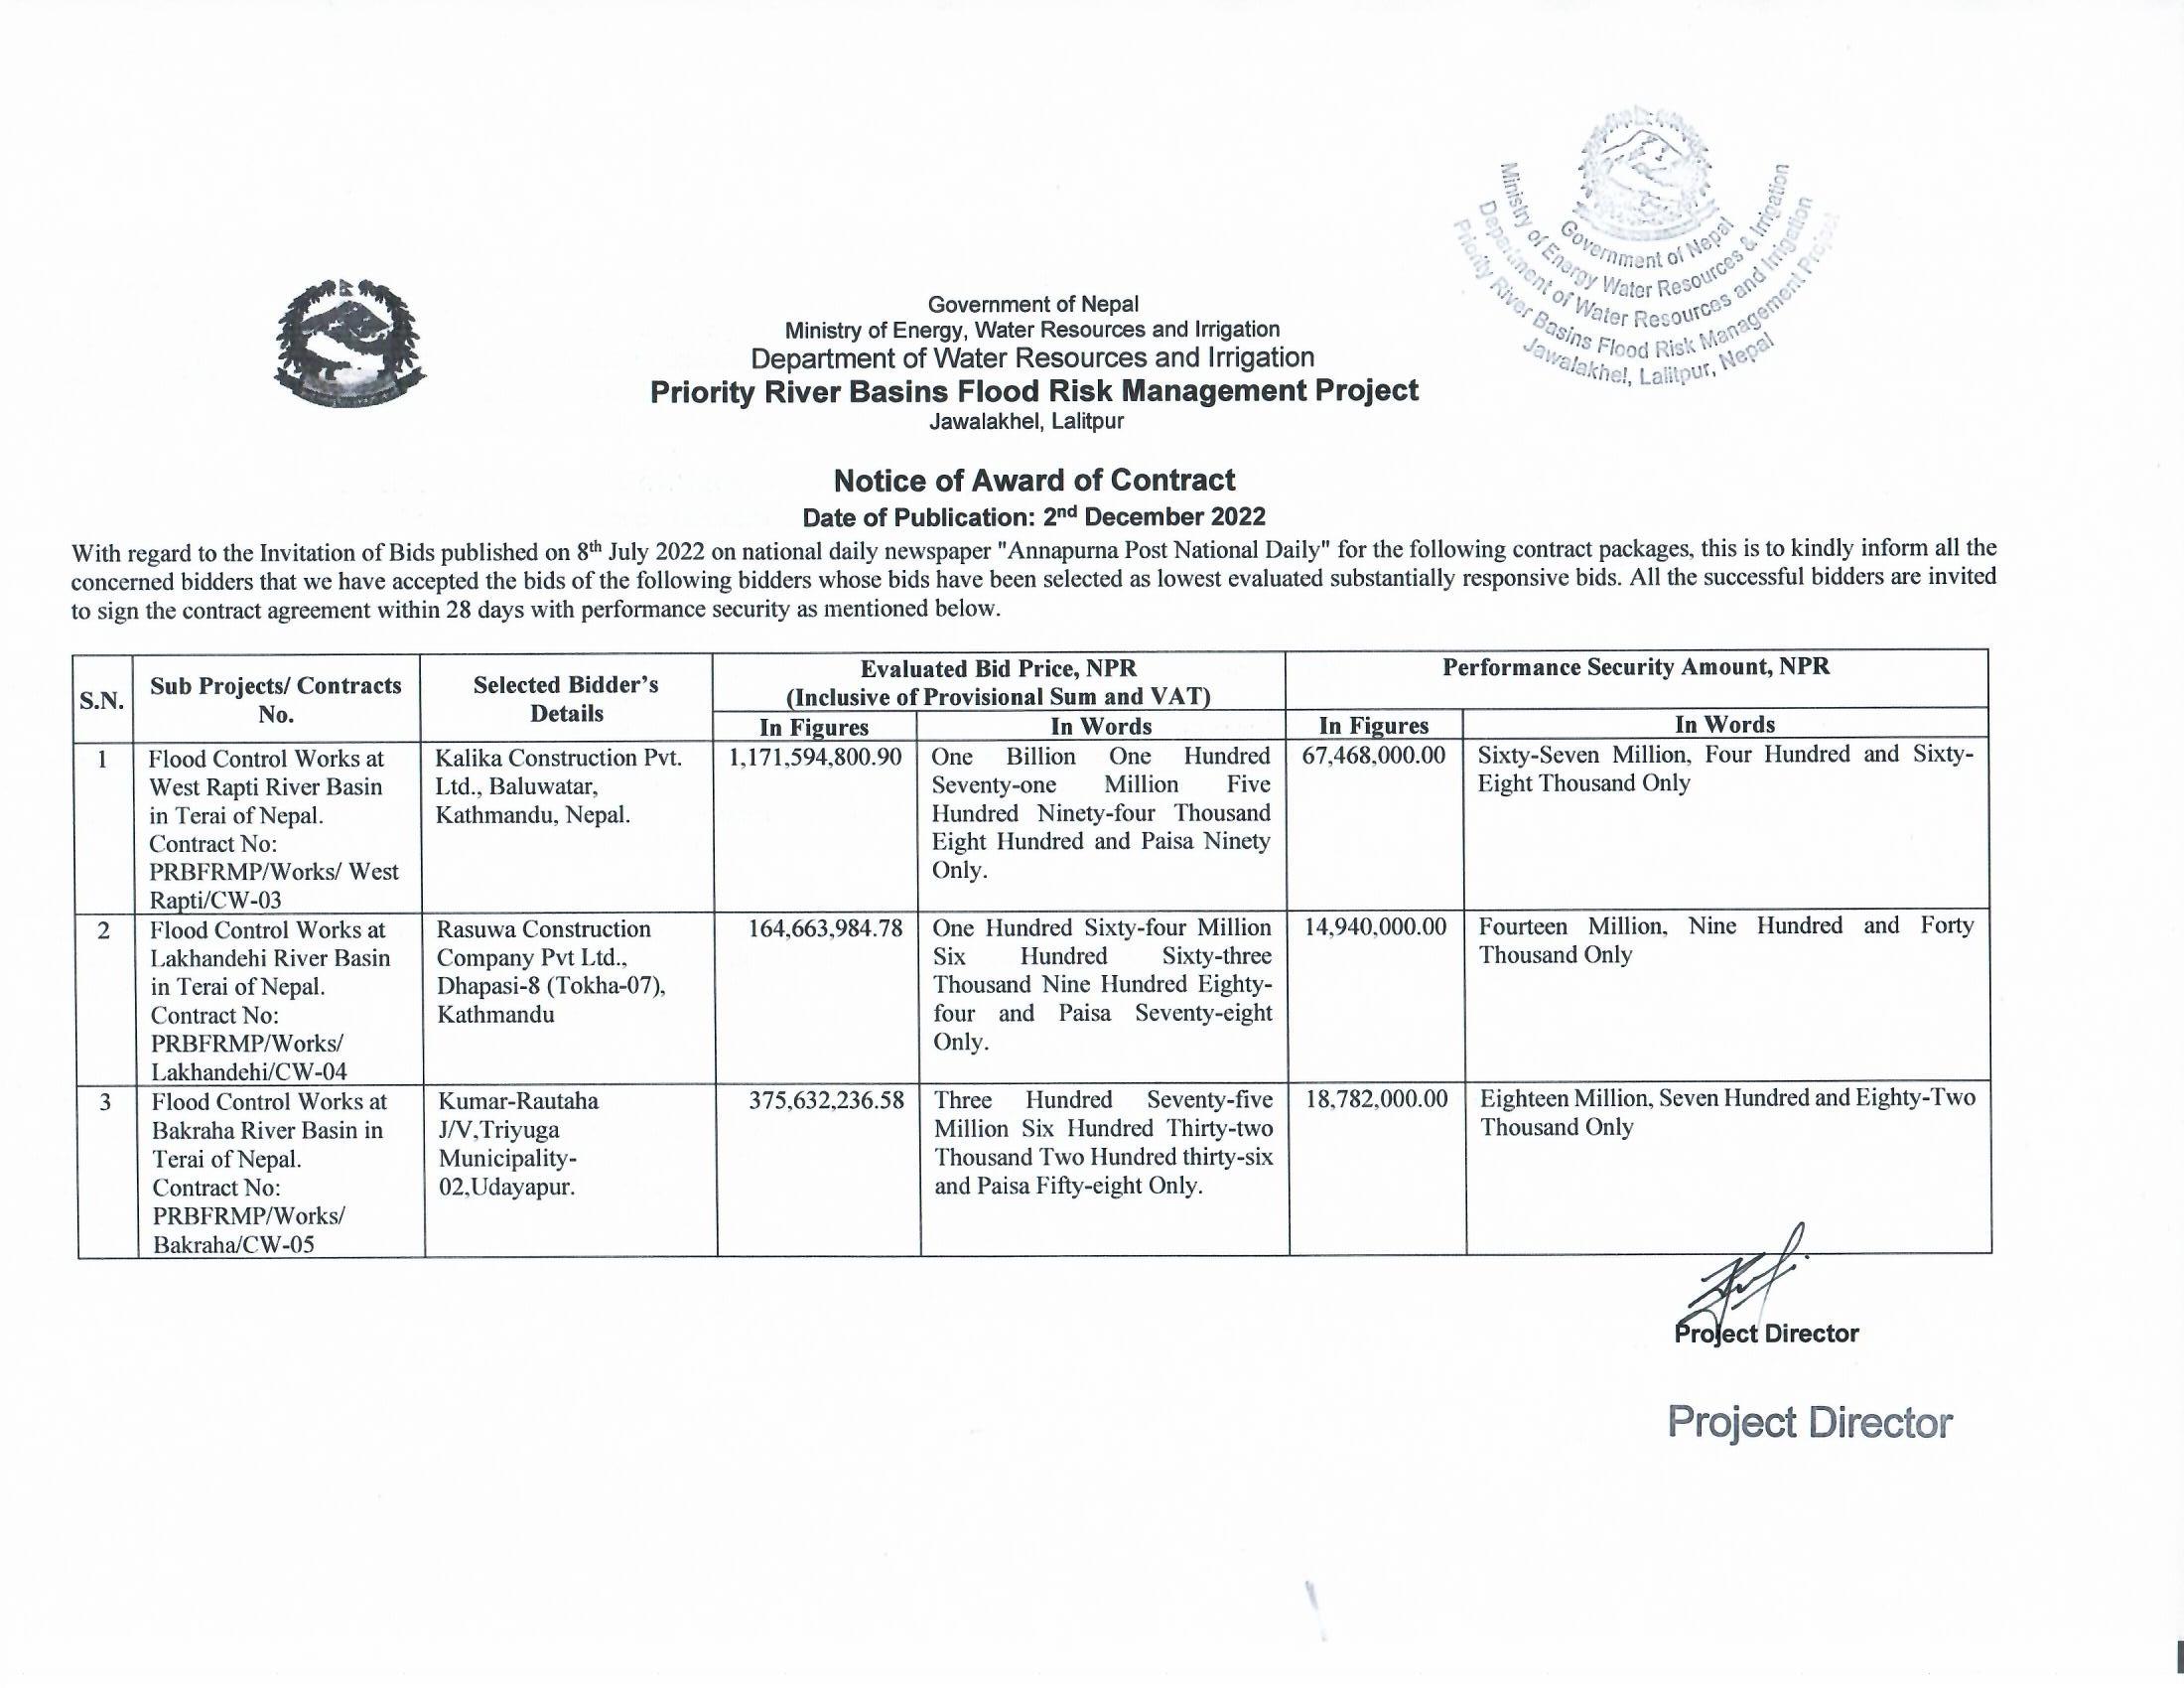 Notice of Award of Contract for CW-03, CW-04 and CW-05